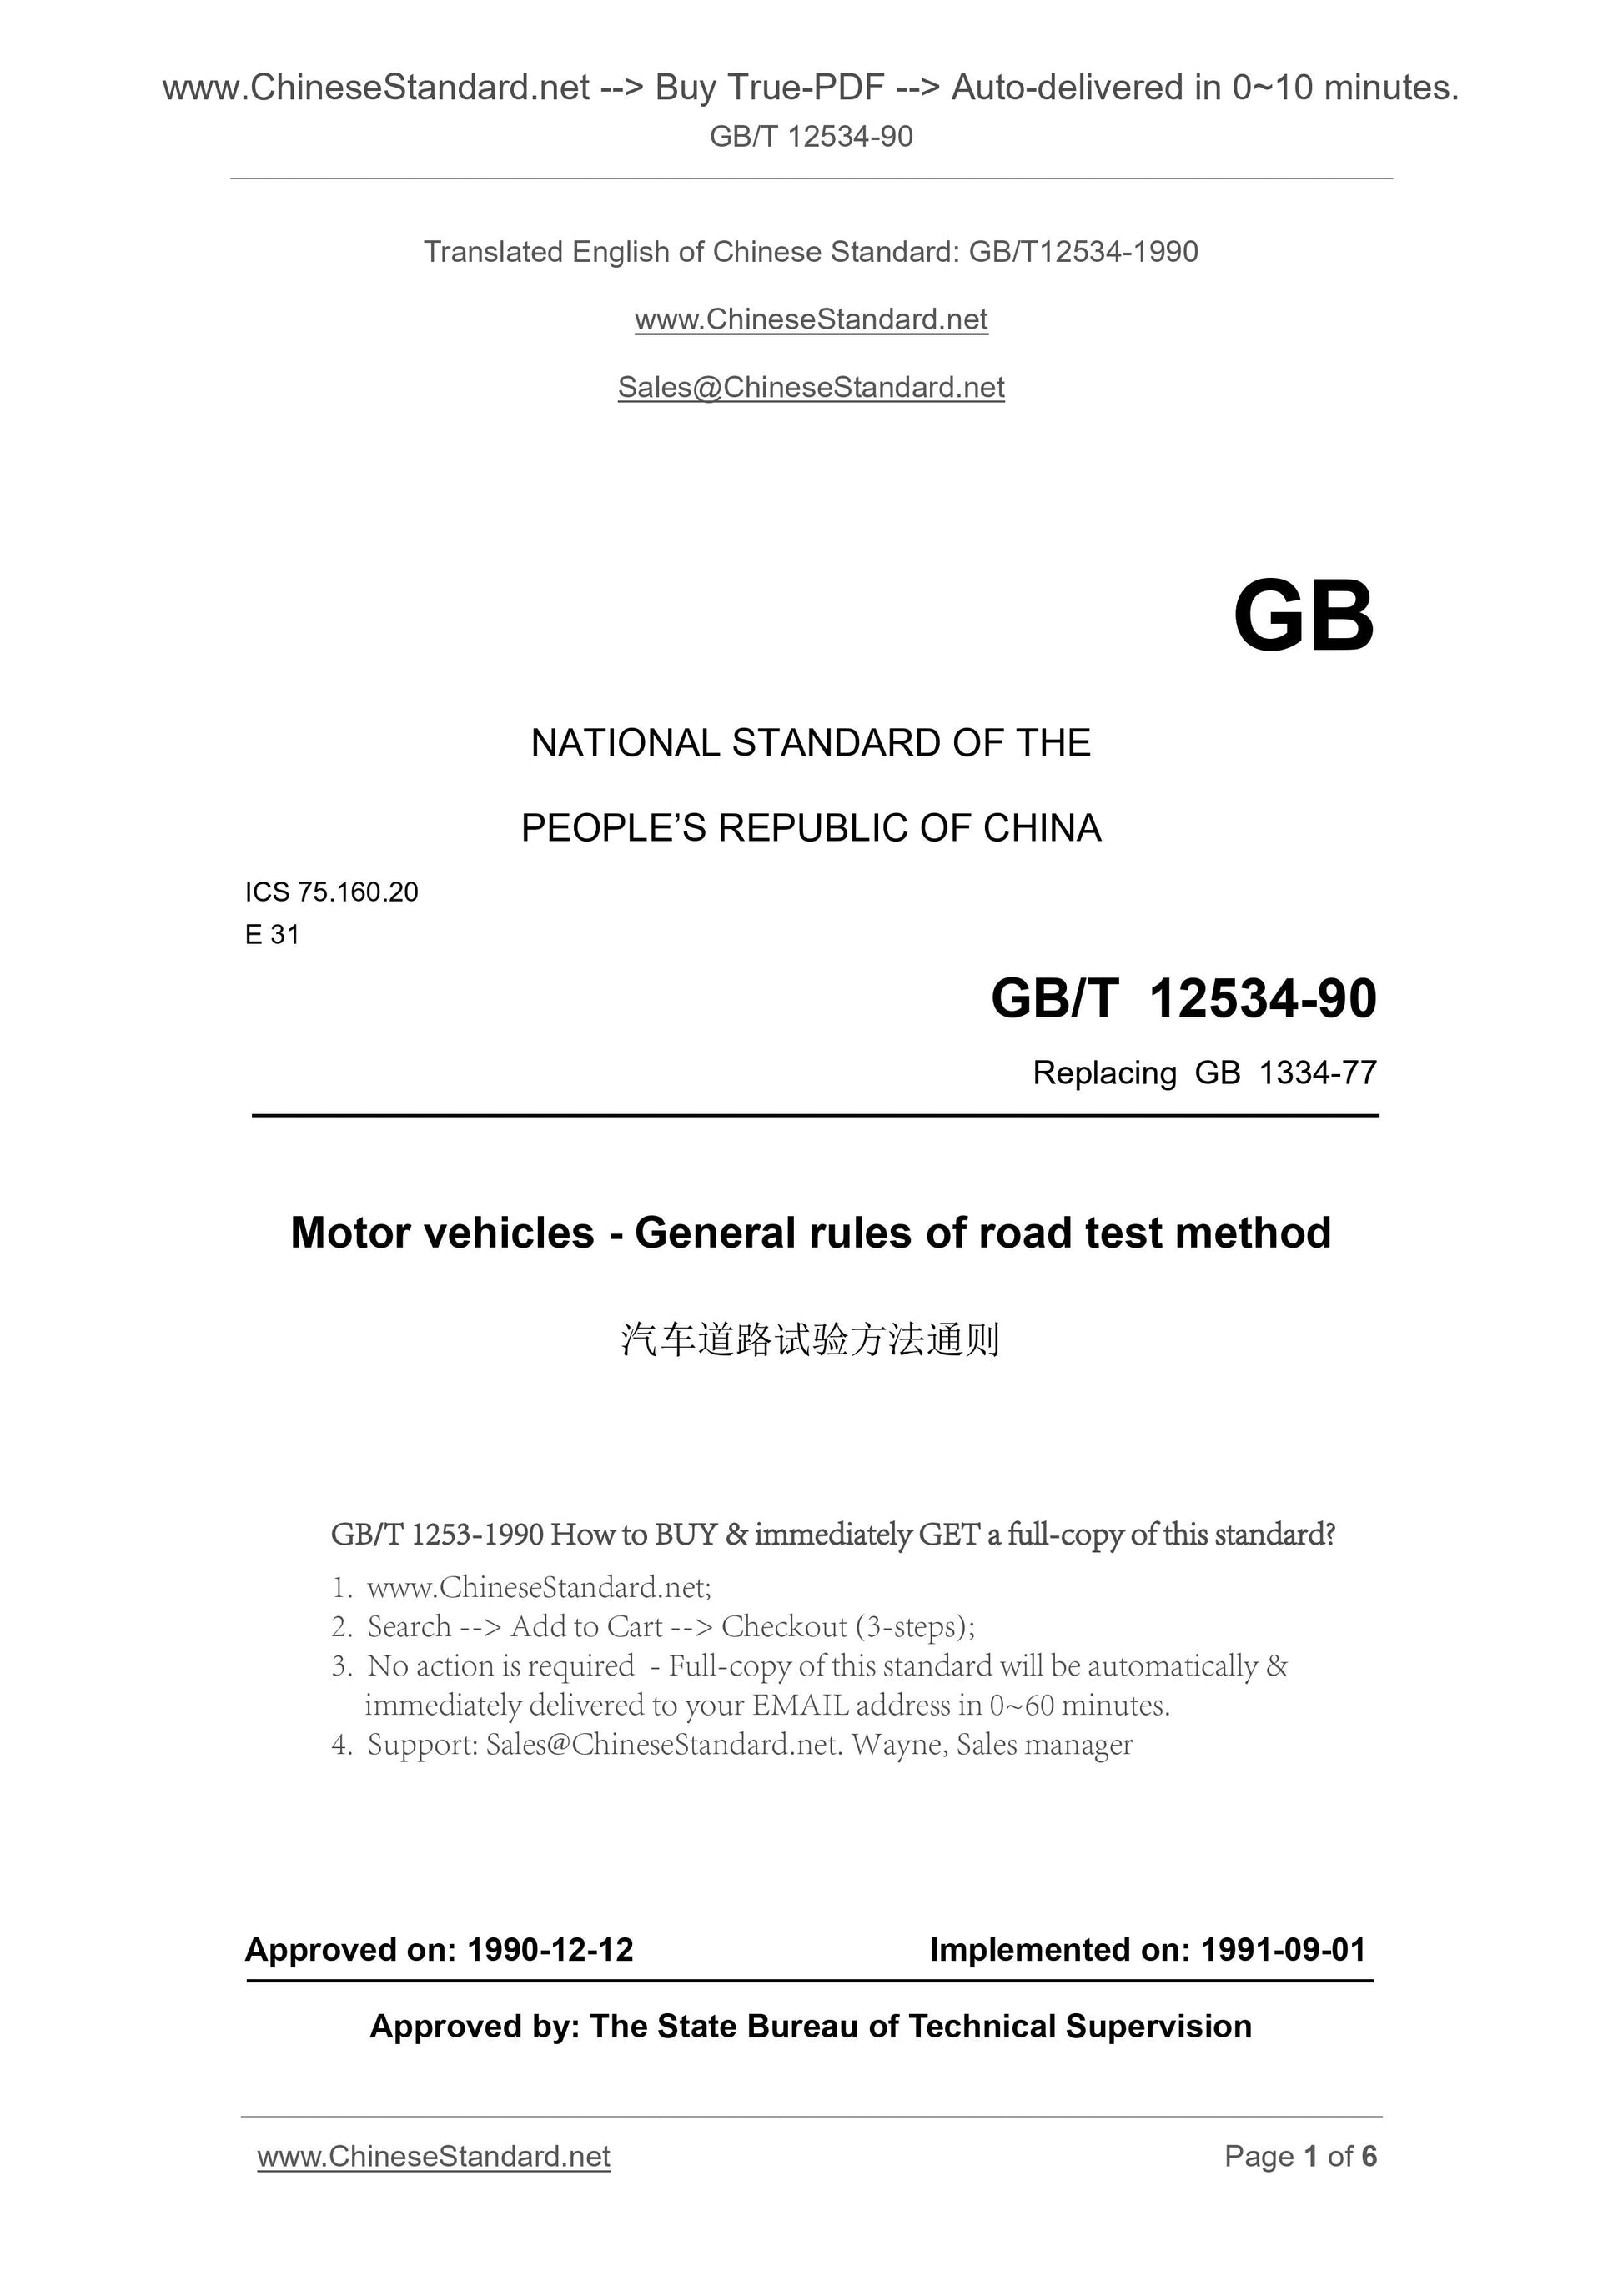 GB/T 12534-1990 Page 1